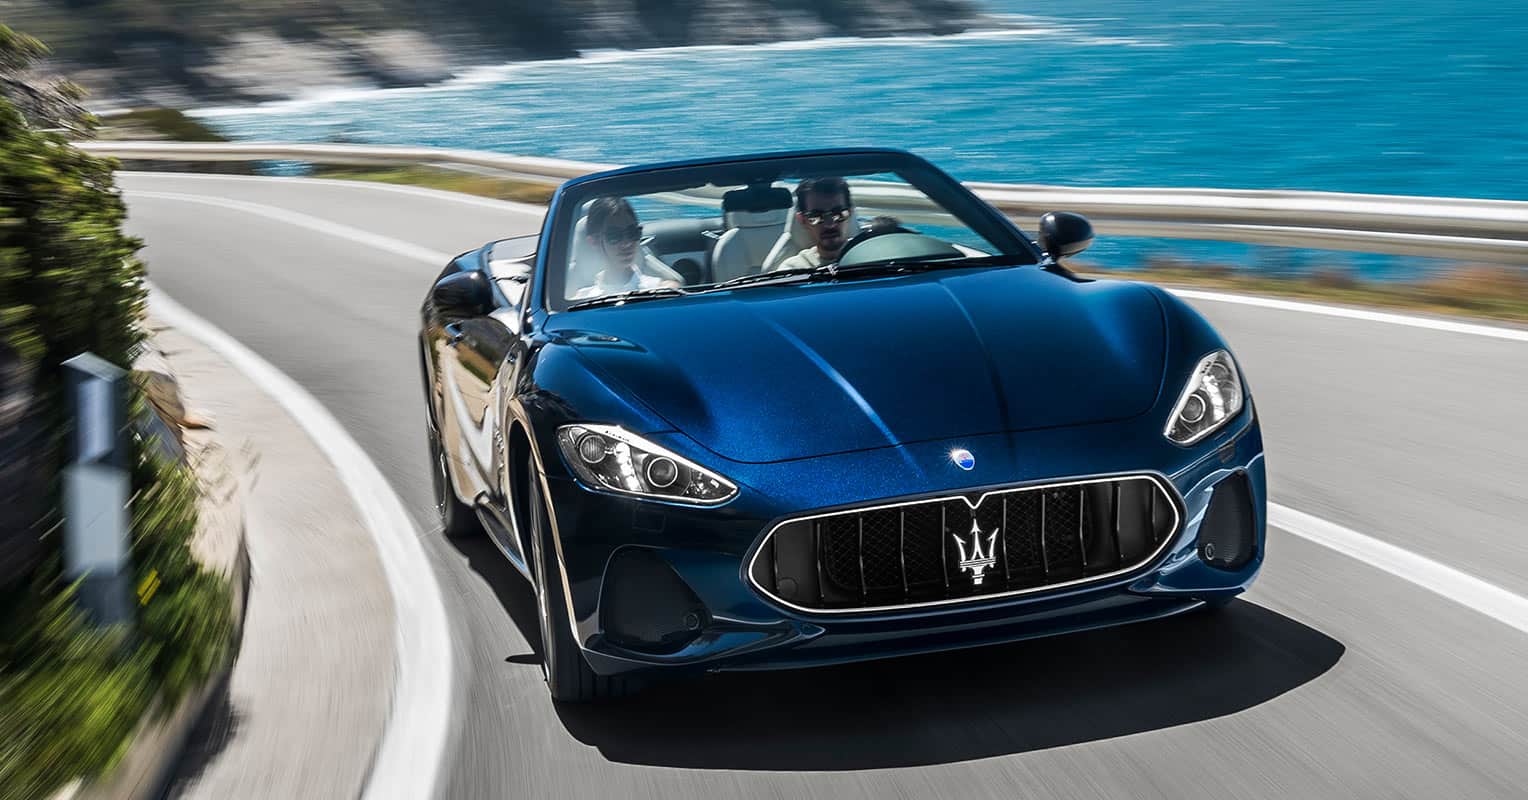 Maserati GranCabrio convertible has been introduced, featuring a V6 engine with 550 horsepower